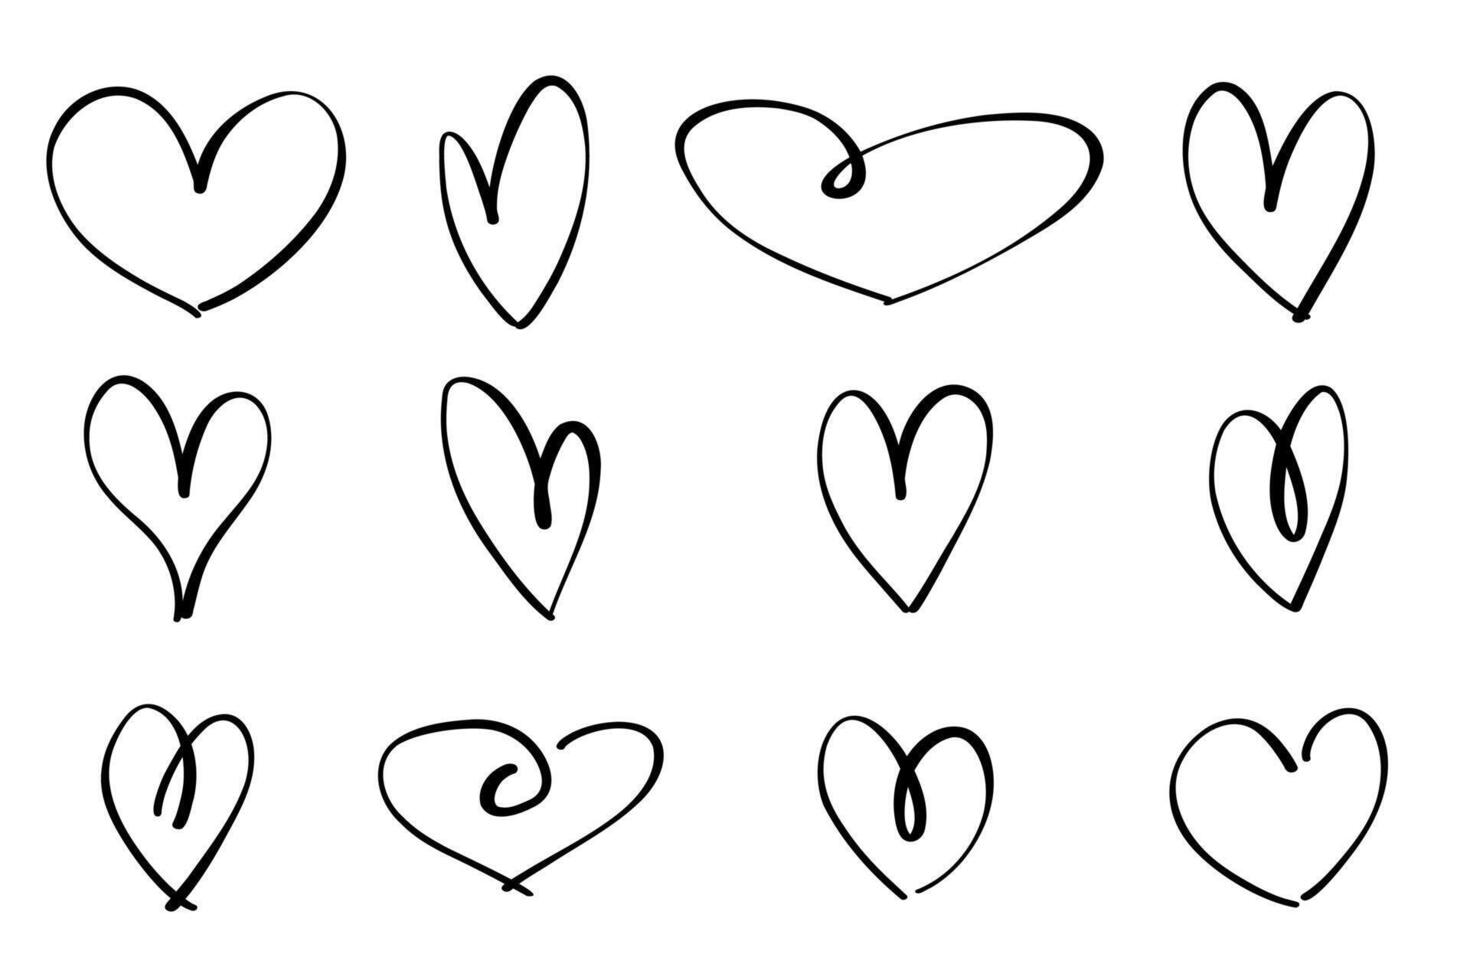 A set of twelve hand-drawn hearts. Hand drawn rough heart marker isolated on white background. Vector illustration for your graphic design